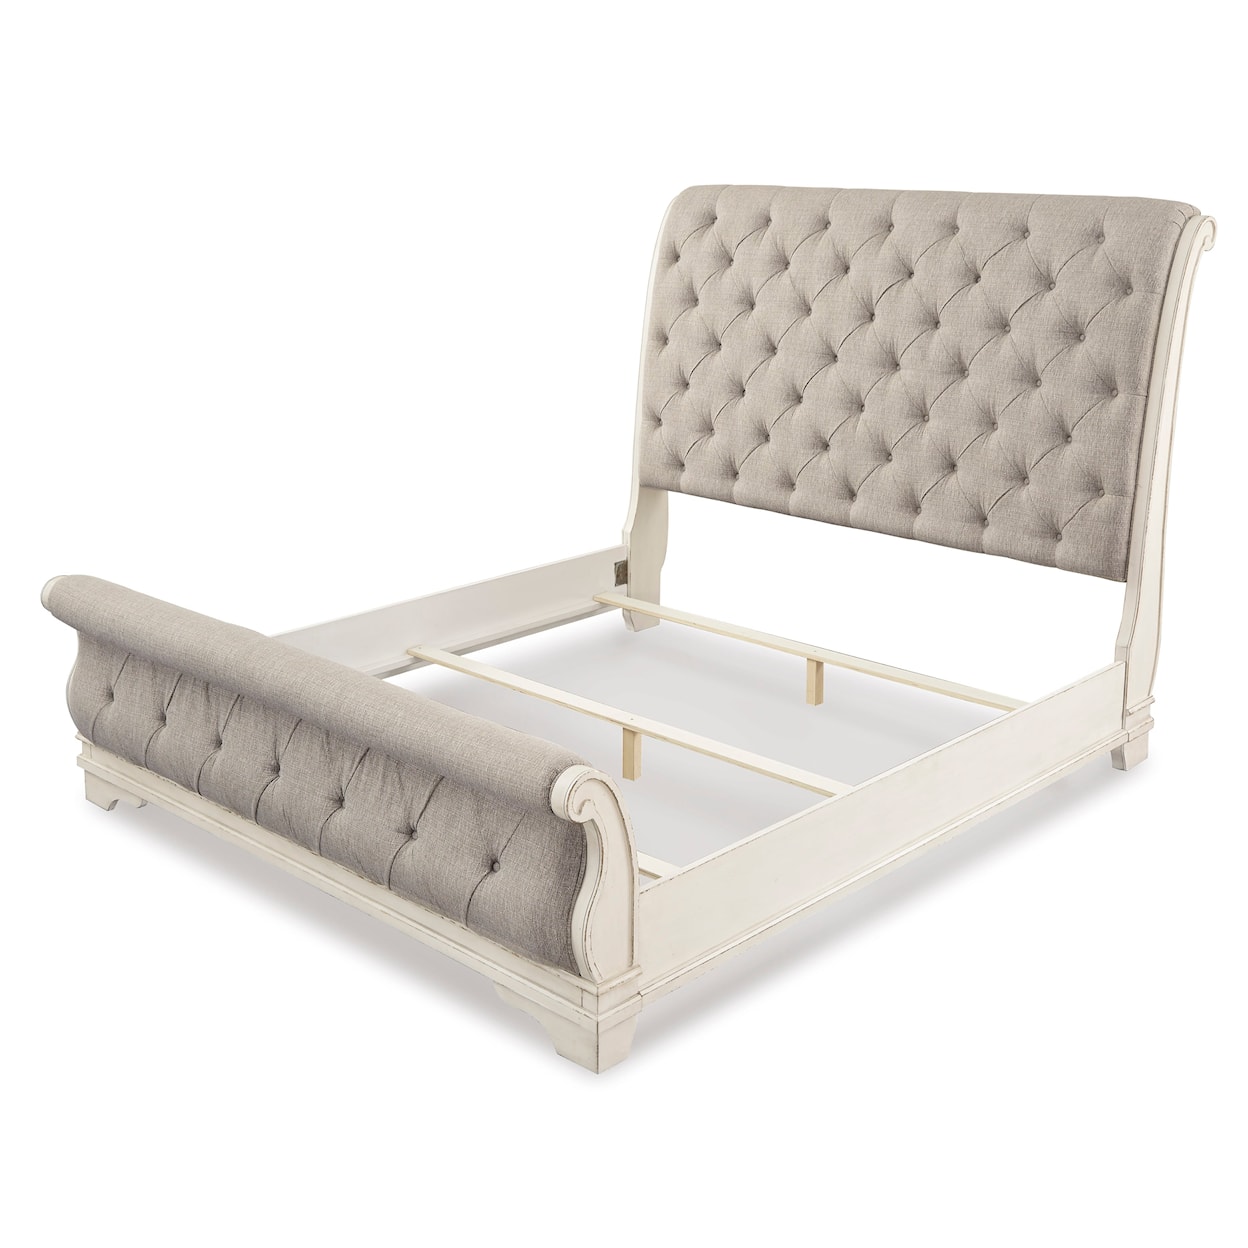 Signature Design by Ashley Realyn King Upholstered Sleigh Bed